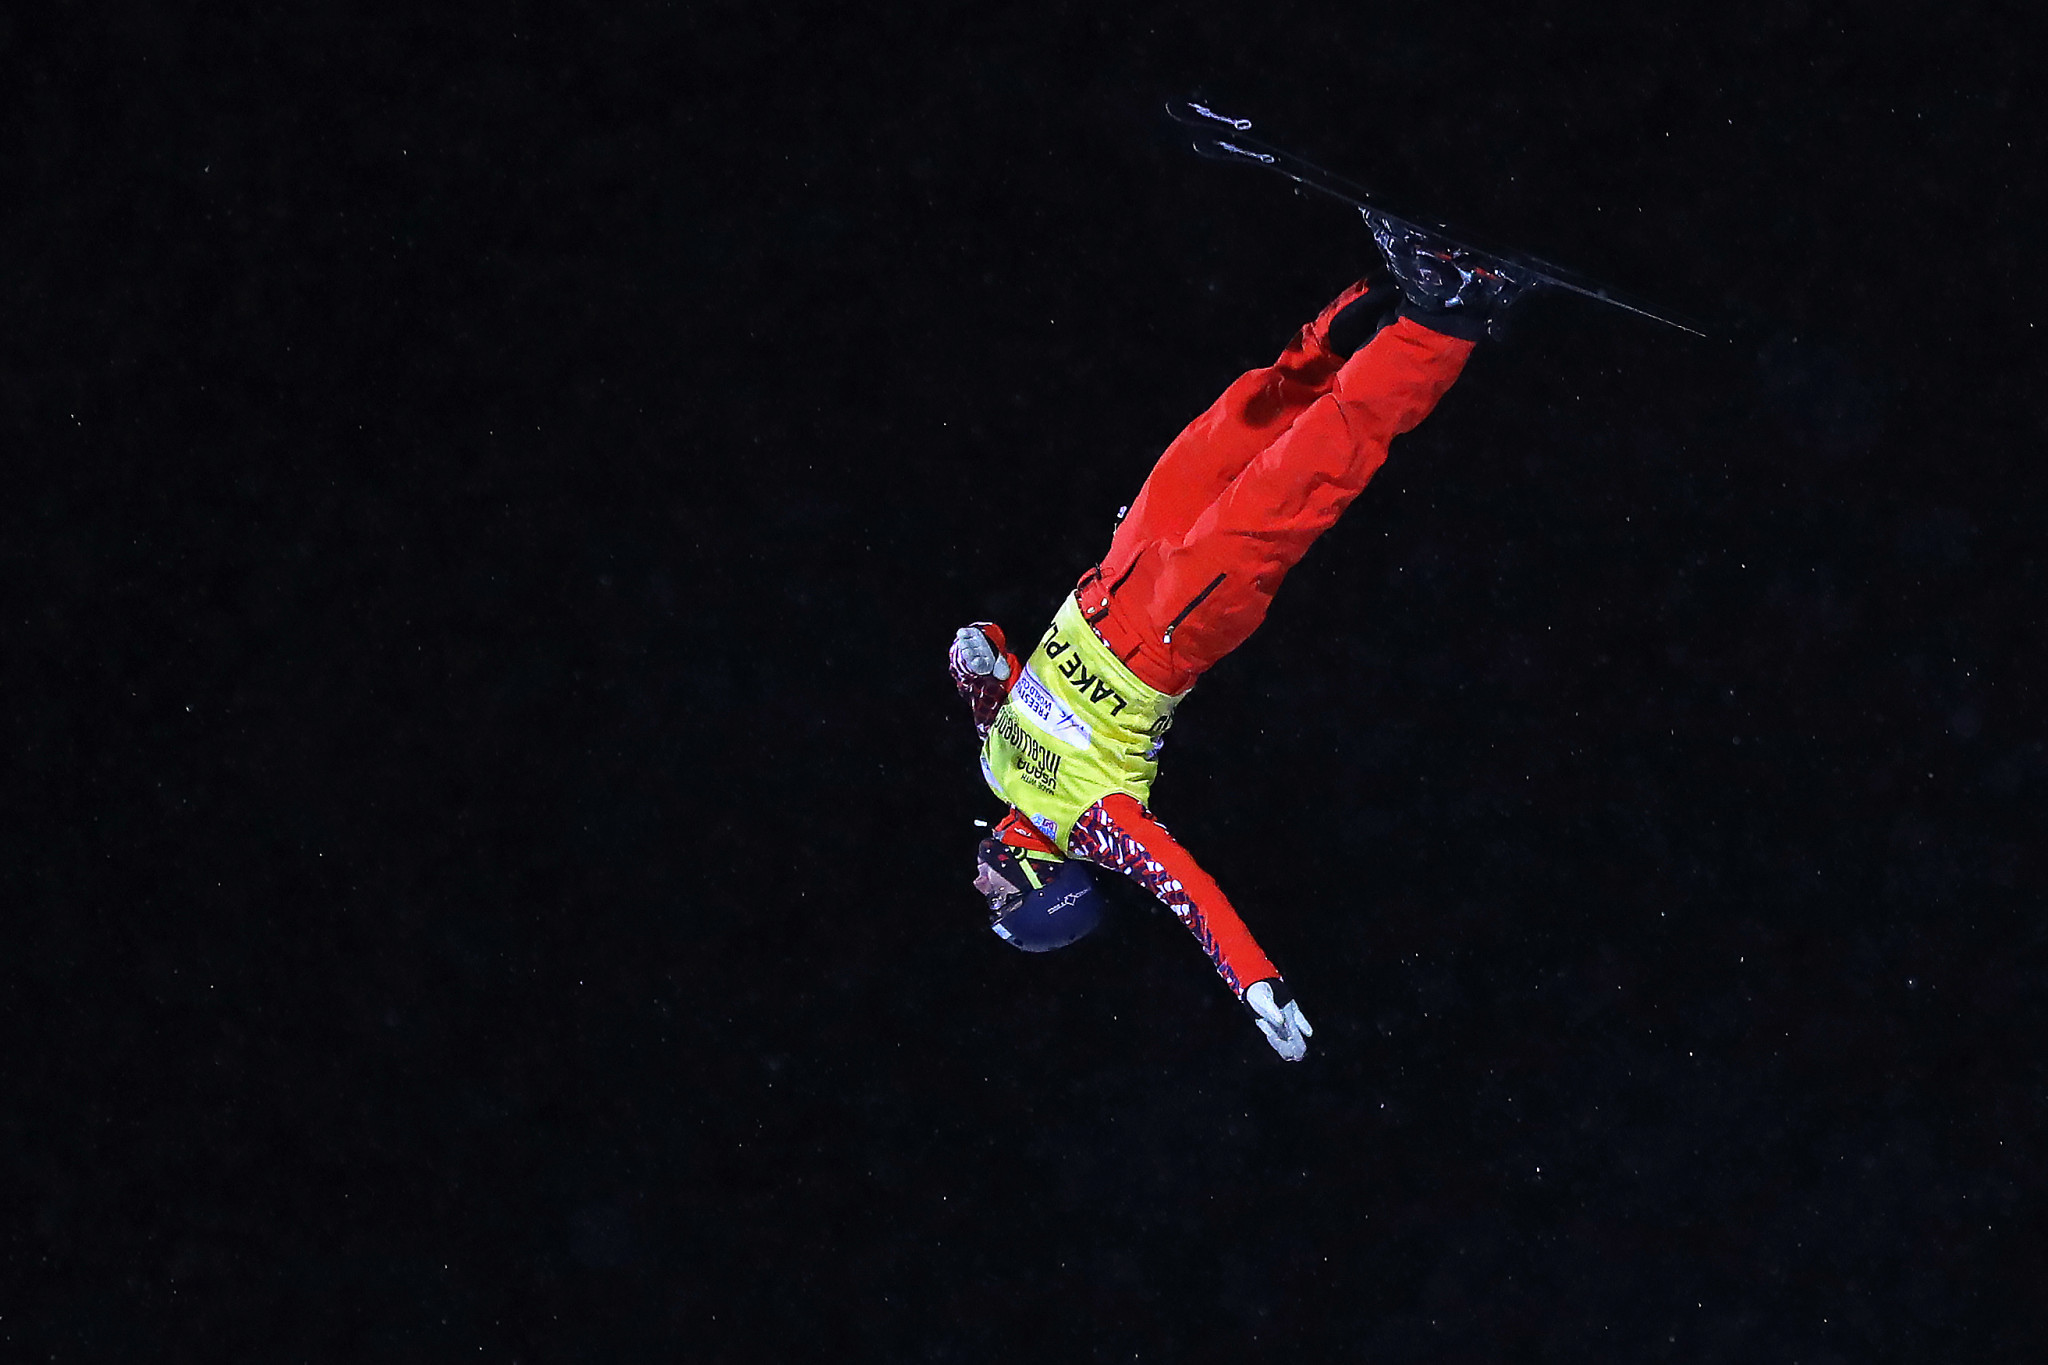 Maxim Burov managed his fifth FIS Aerials World Cup win in Minsk ©Getty Images